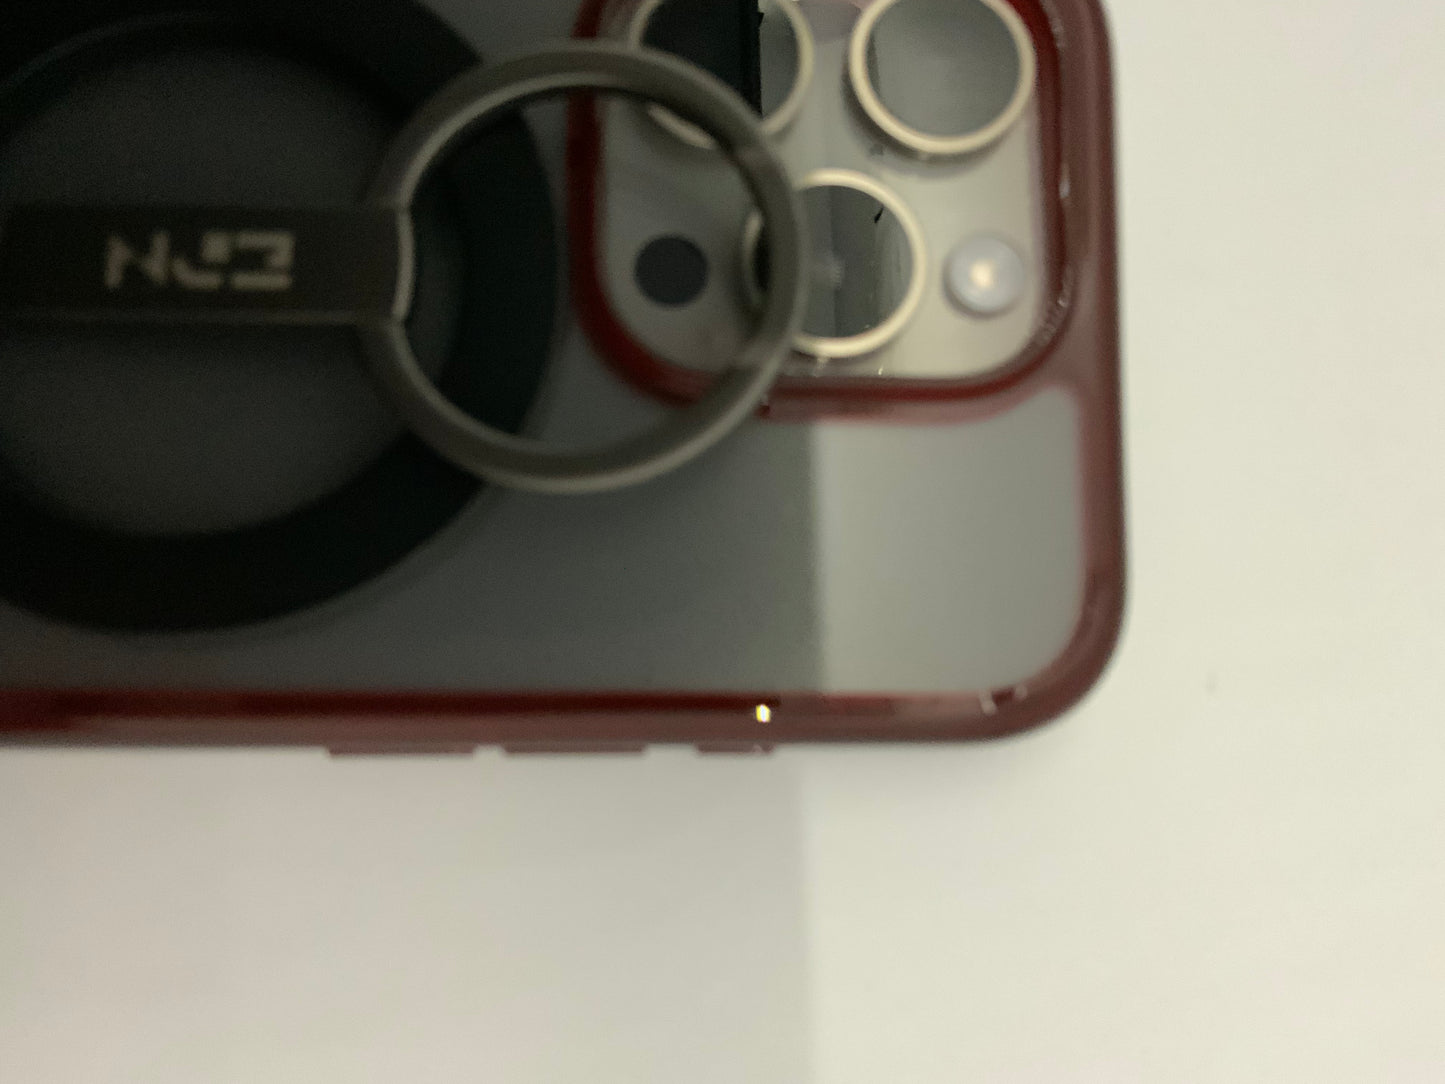 Be My AI: The picture shows a close-up of a few objects. On the left side, there is a black object with a circular shape and a metal ring attached to it. The metal ring has a small rectangular tag with the letters "N" and "Z" on it. On the right side, there is a part of a red phone case with a camera cutout. The camera cutout has three circular holes and one oval hole. The background is white.